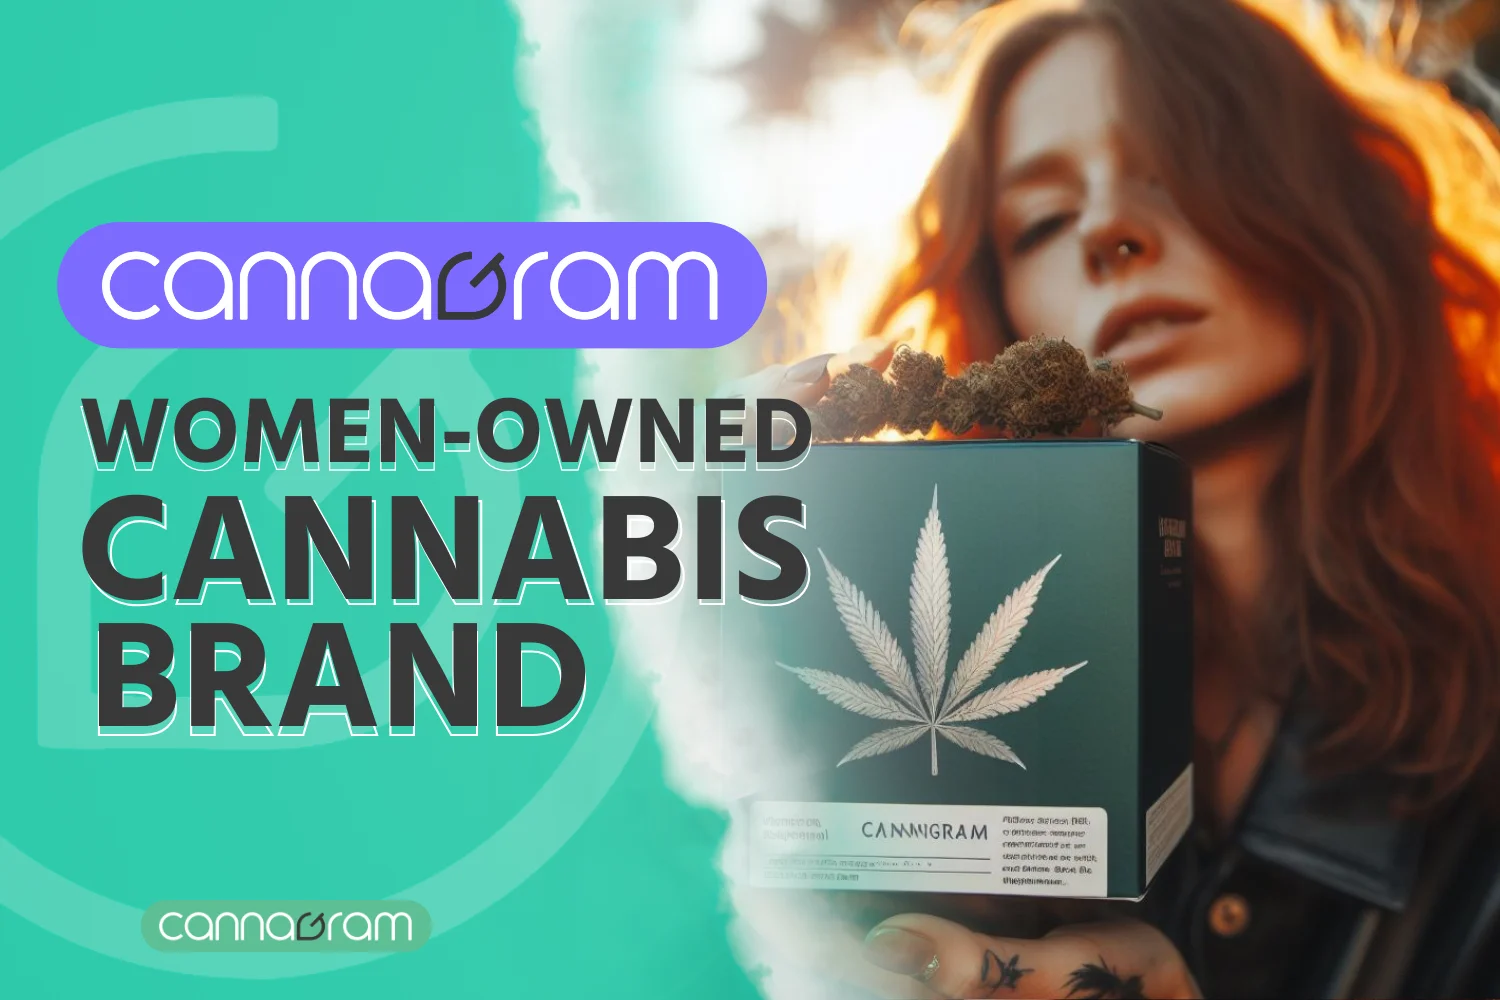 Cannagram's-Women-Owned Cannabis-Brand-